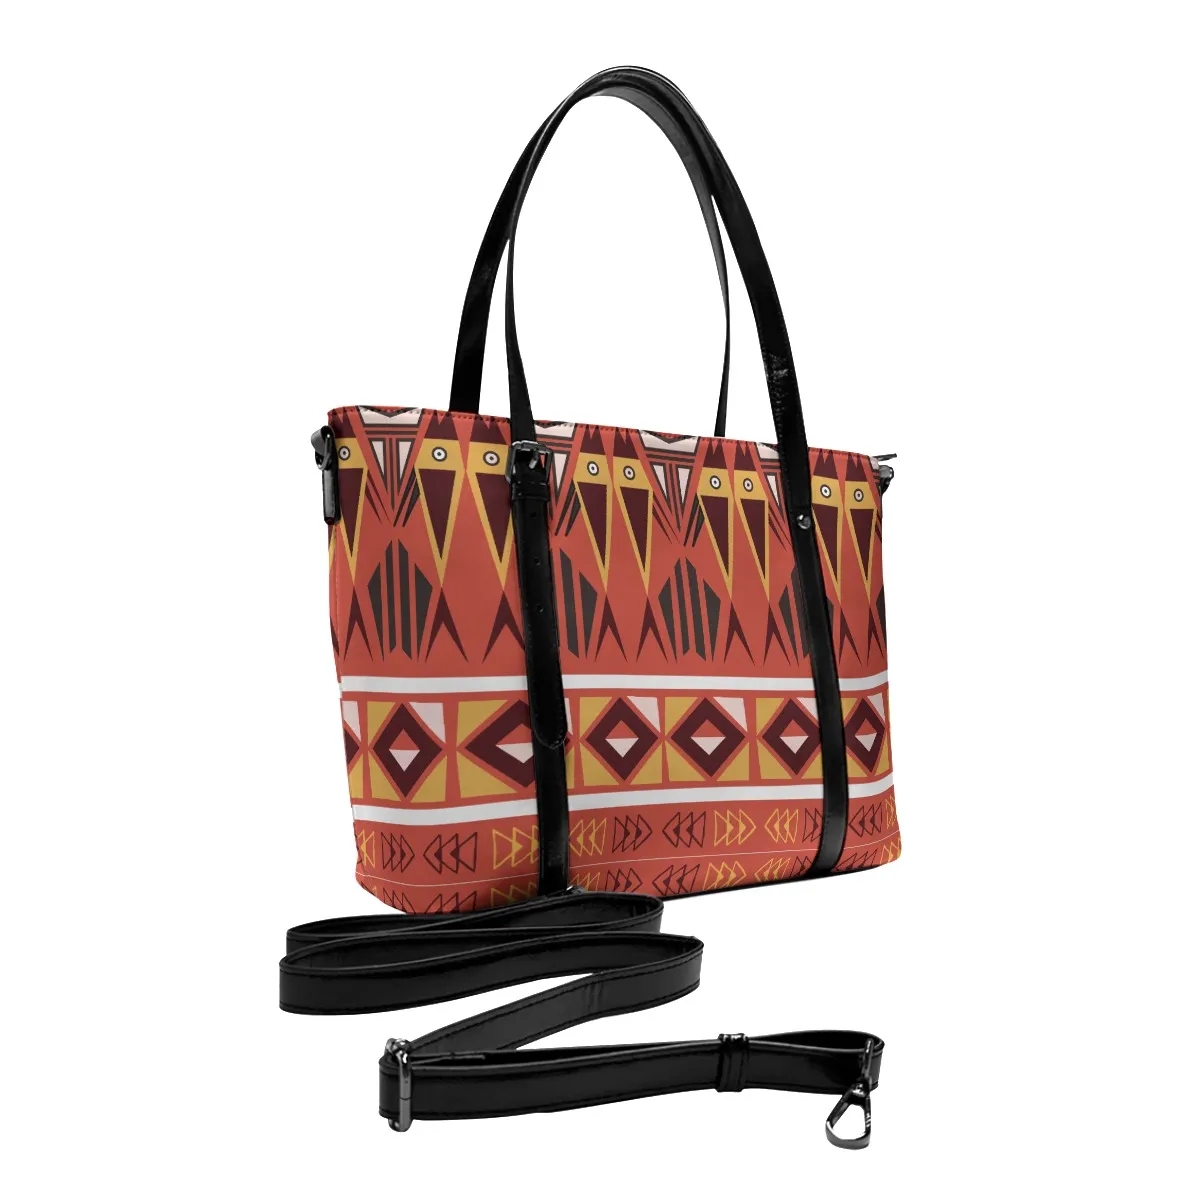 Women’s Tote Bag With Adjustable Handle 2